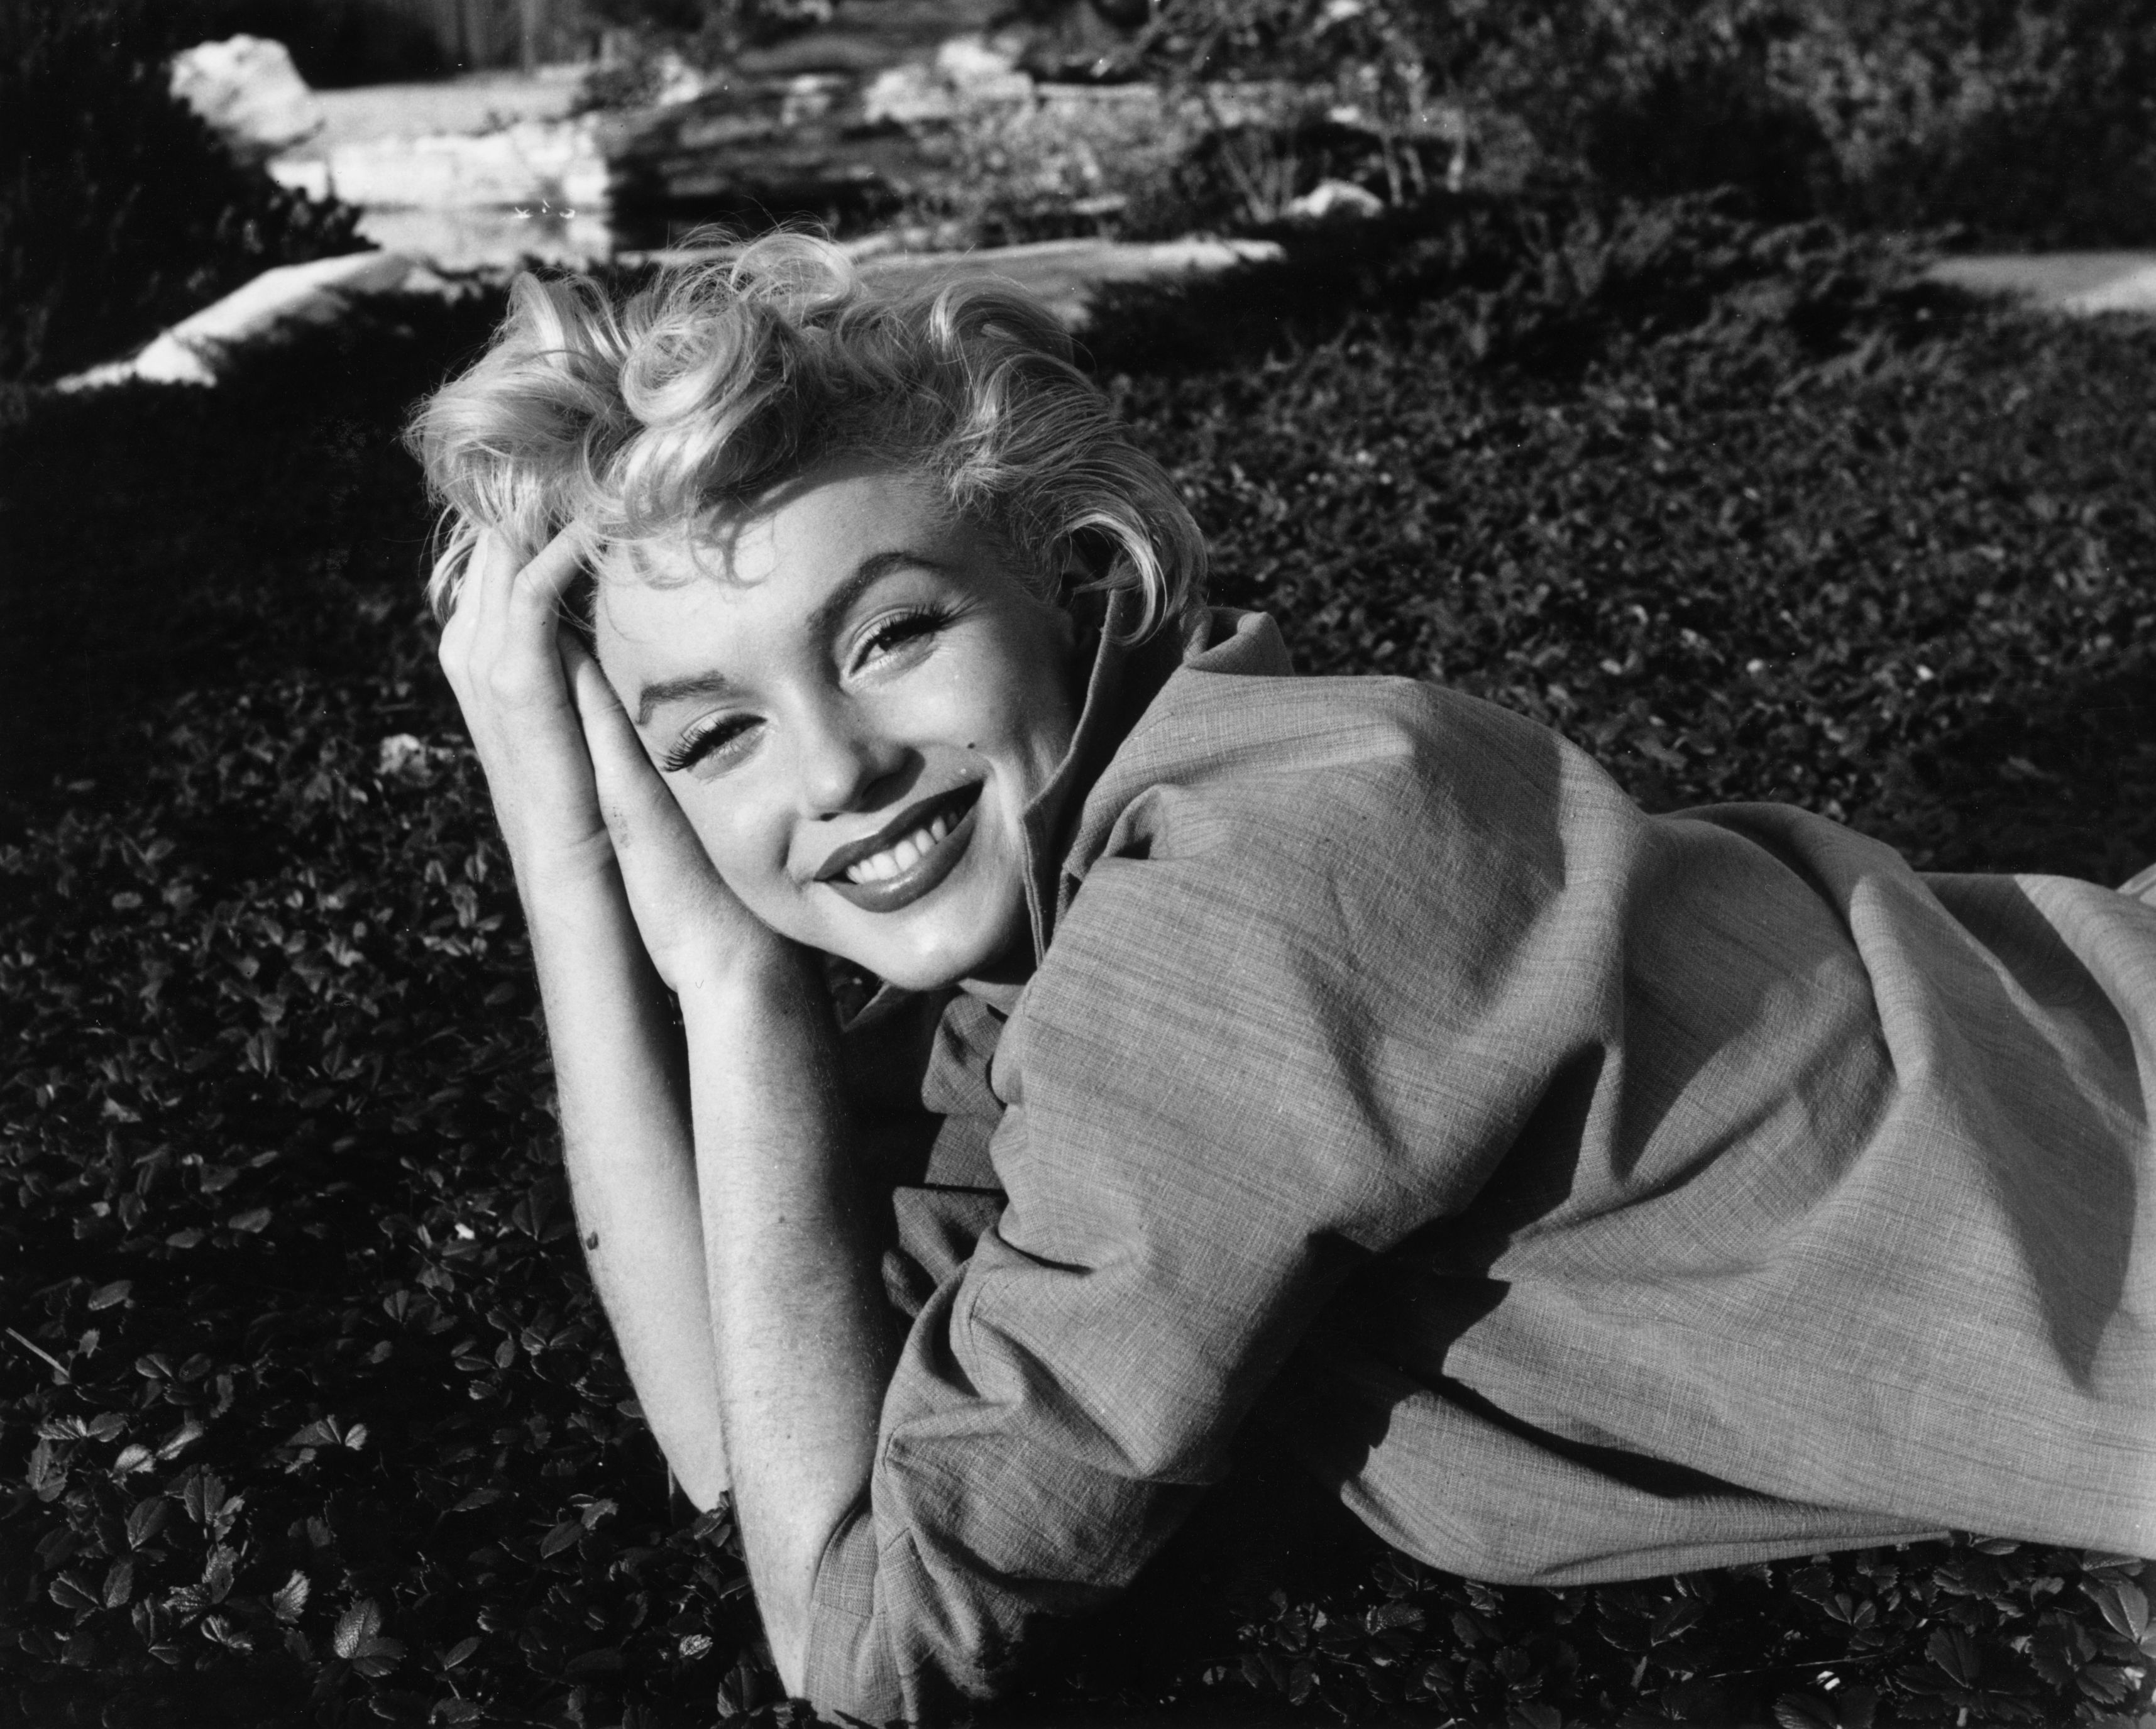 Late Hollywood actress Marilyn Monroe | Photo: Baron/Hulton Archive/Getty Images